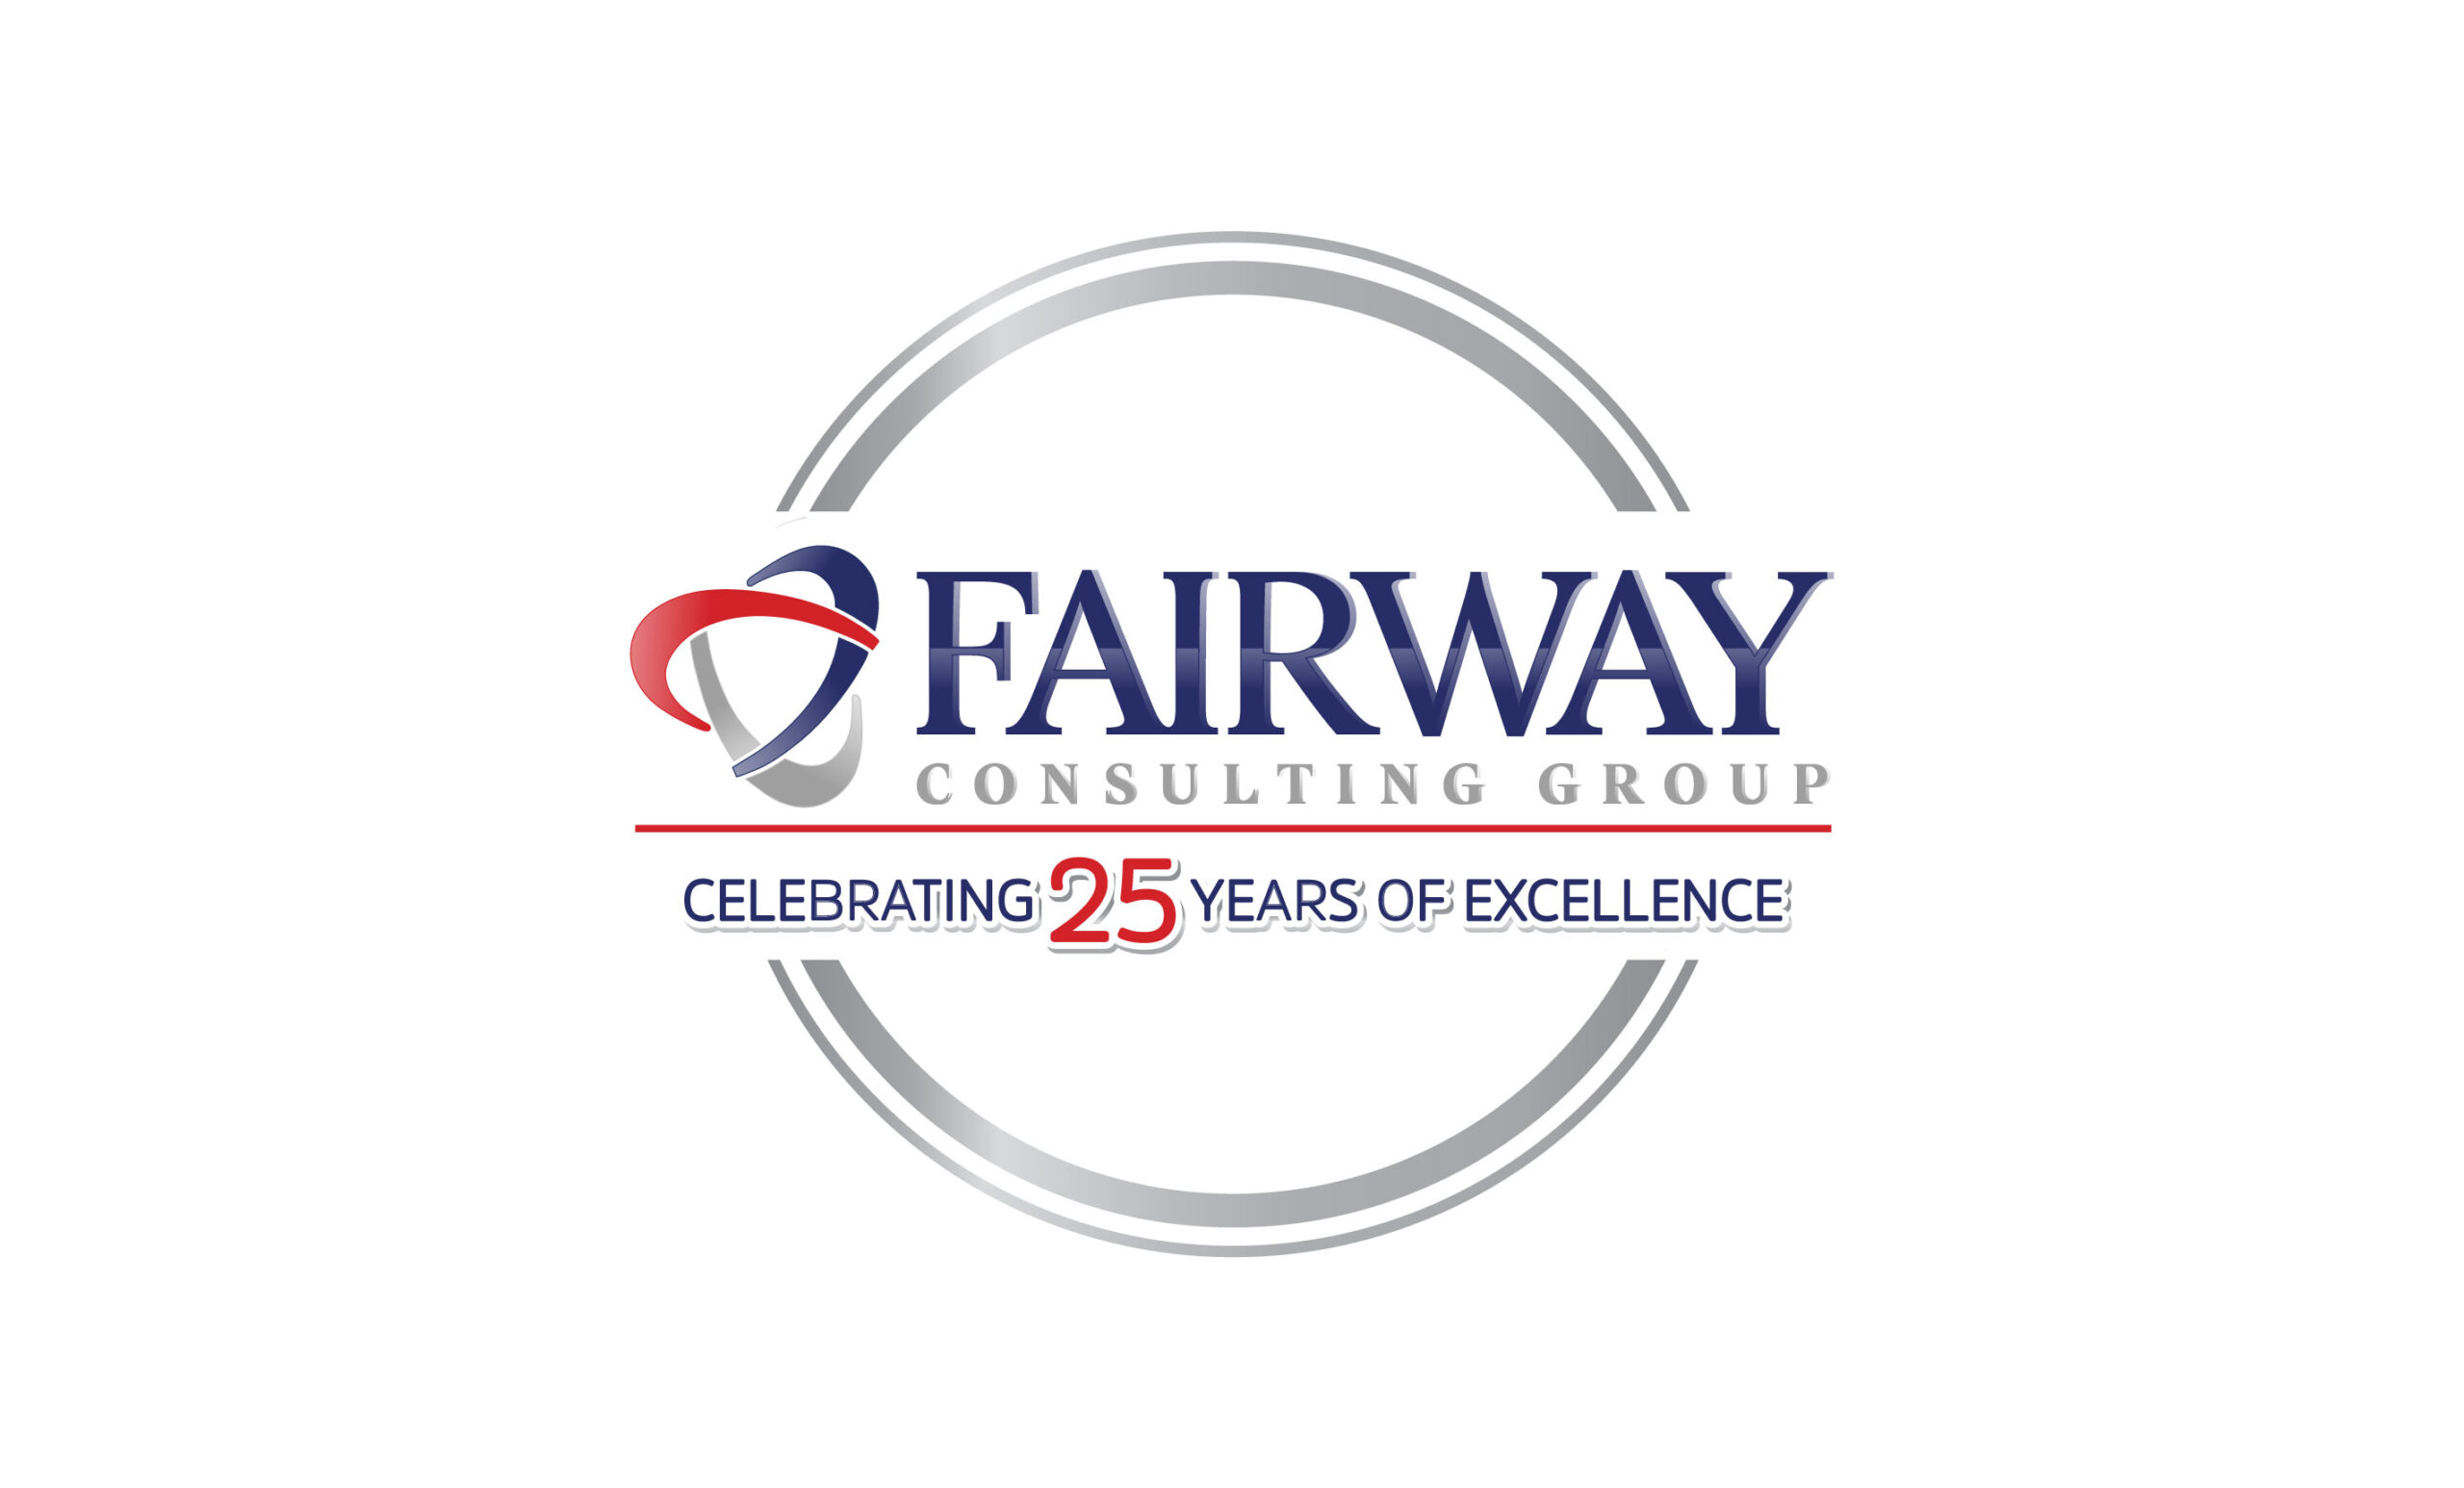 Fairway Consulting Group